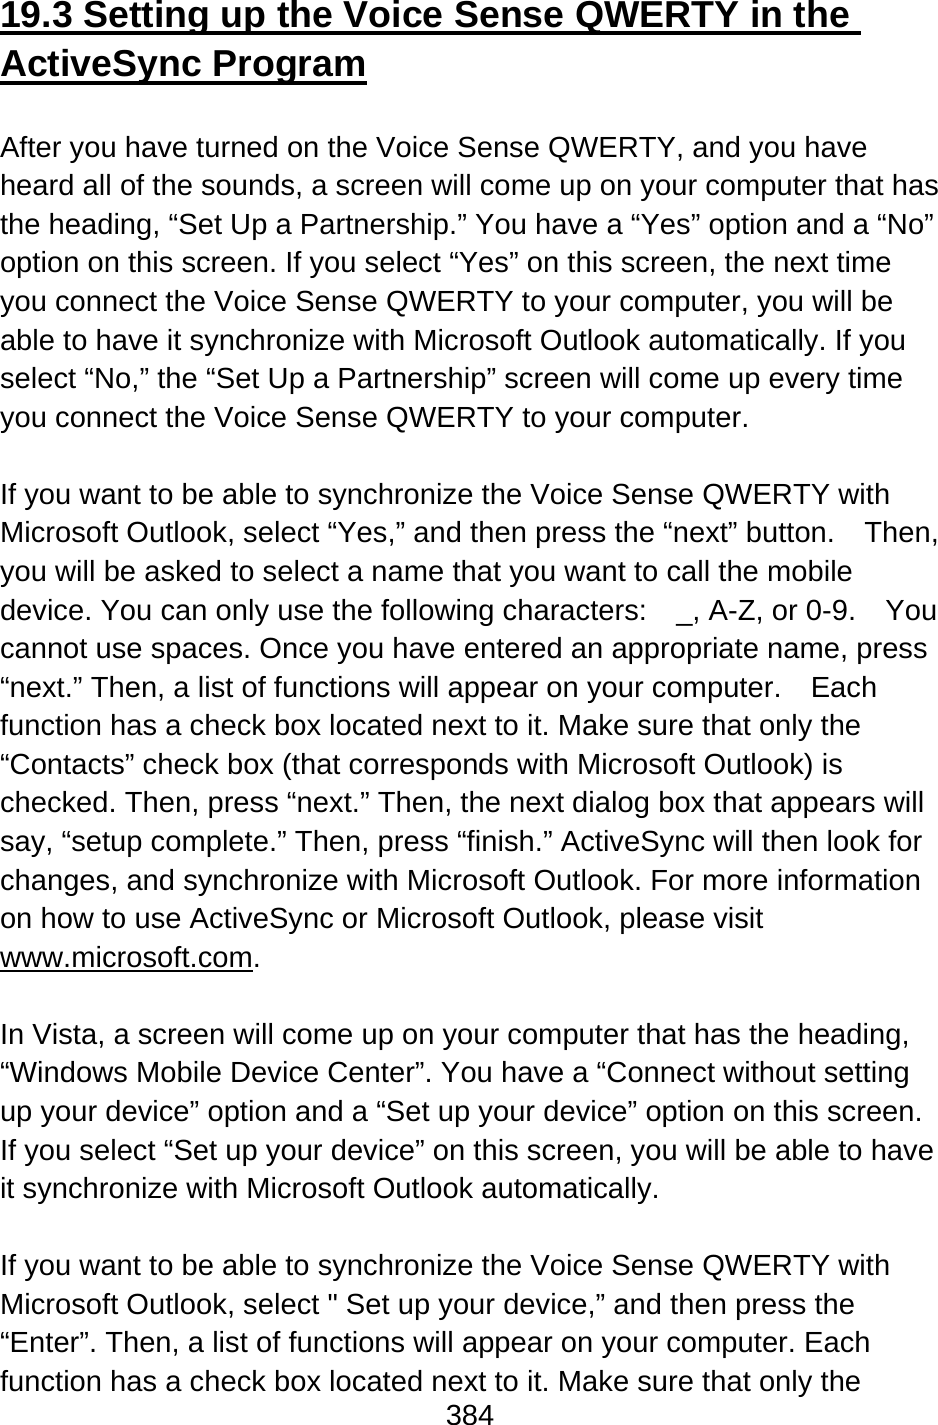 384  19.3 Setting up the Voice Sense QWERTY in the ActiveSync Program  After you have turned on the Voice Sense QWERTY, and you have heard all of the sounds, a screen will come up on your computer that has the heading, “Set Up a Partnership.” You have a “Yes” option and a “No” option on this screen. If you select “Yes” on this screen, the next time you connect the Voice Sense QWERTY to your computer, you will be able to have it synchronize with Microsoft Outlook automatically. If you select “No,” the “Set Up a Partnership” screen will come up every time you connect the Voice Sense QWERTY to your computer.  If you want to be able to synchronize the Voice Sense QWERTY with Microsoft Outlook, select “Yes,” and then press the “next” button.  Then, you will be asked to select a name that you want to call the mobile device. You can only use the following characters:  _, A-Z, or 0-9.  You cannot use spaces. Once you have entered an appropriate name, press “next.” Then, a list of functions will appear on your computer.    Each function has a check box located next to it. Make sure that only the “Contacts” check box (that corresponds with Microsoft Outlook) is checked. Then, press “next.” Then, the next dialog box that appears will say, “setup complete.” Then, press “finish.” ActiveSync will then look for changes, and synchronize with Microsoft Outlook. For more information on how to use ActiveSync or Microsoft Outlook, please visit www.microsoft.com.  In Vista, a screen will come up on your computer that has the heading, “Windows Mobile Device Center”. You have a “Connect without setting up your device” option and a “Set up your device” option on this screen. If you select “Set up your device” on this screen, you will be able to have it synchronize with Microsoft Outlook automatically.    If you want to be able to synchronize the Voice Sense QWERTY with Microsoft Outlook, select &quot; Set up your device,” and then press the “Enter”. Then, a list of functions will appear on your computer. Each function has a check box located next to it. Make sure that only the 